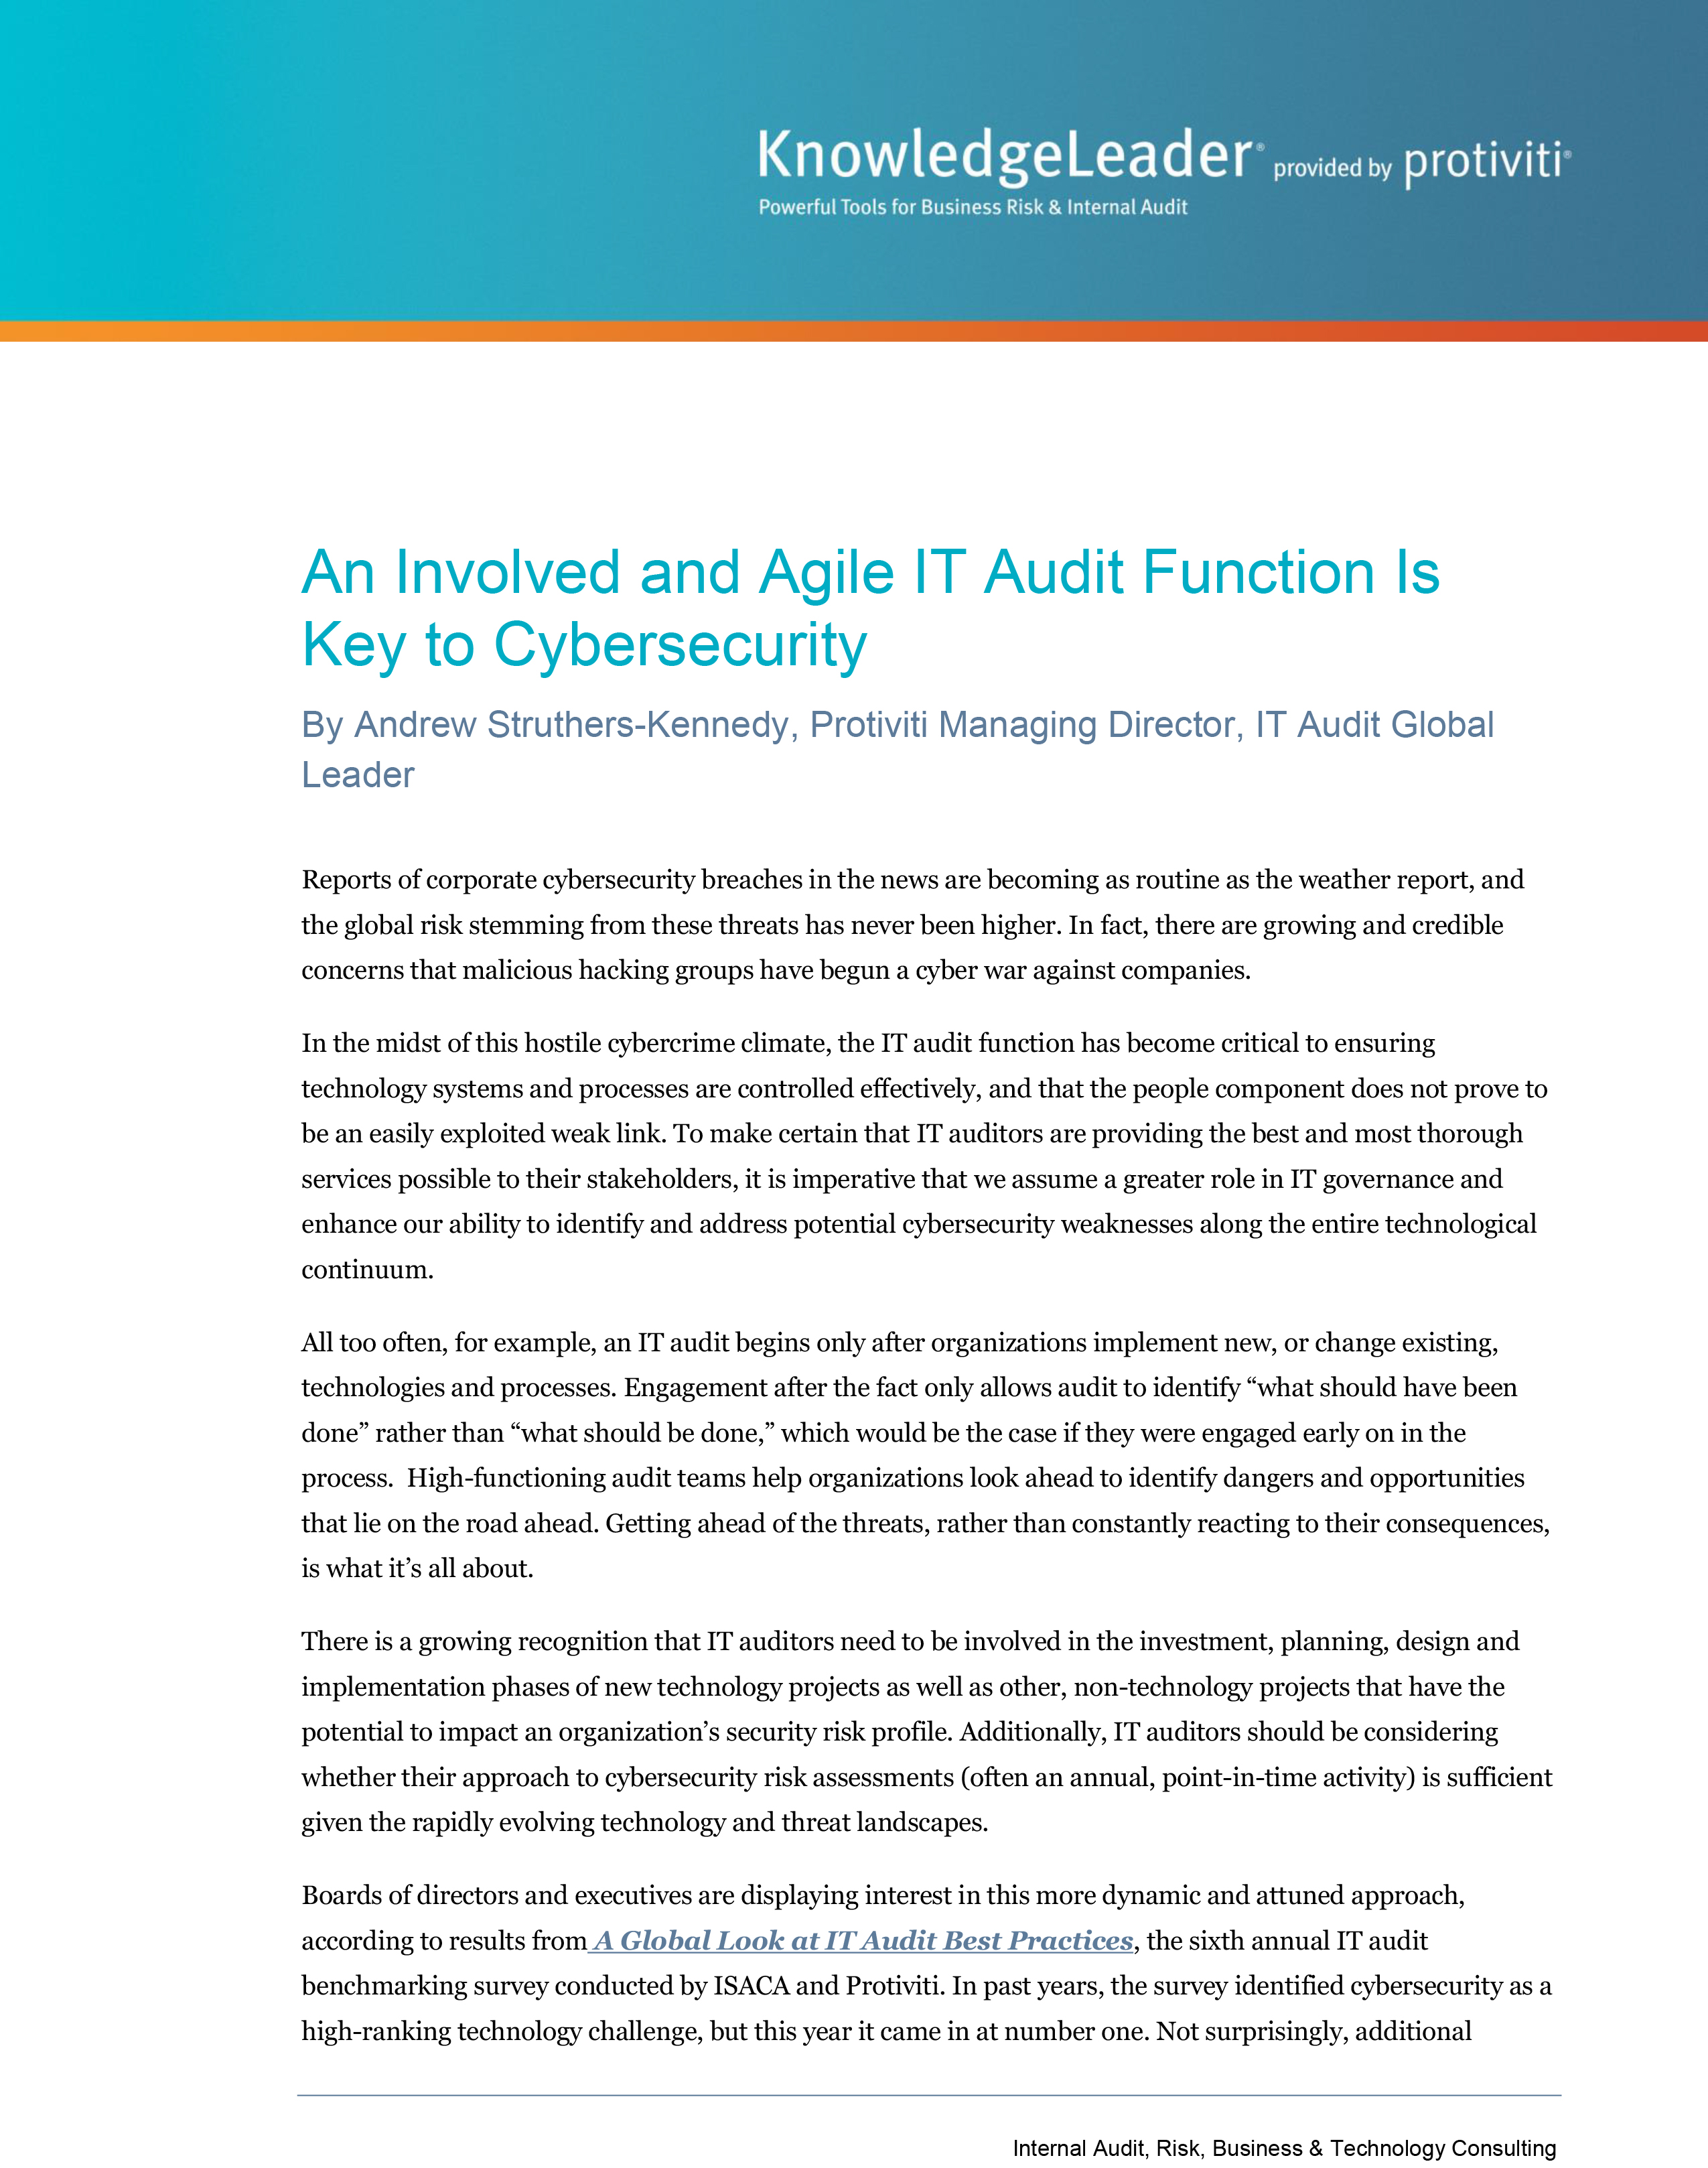 Screenshot of the first page of An Involved and Agile IT Audit Function is Key 5.21.18